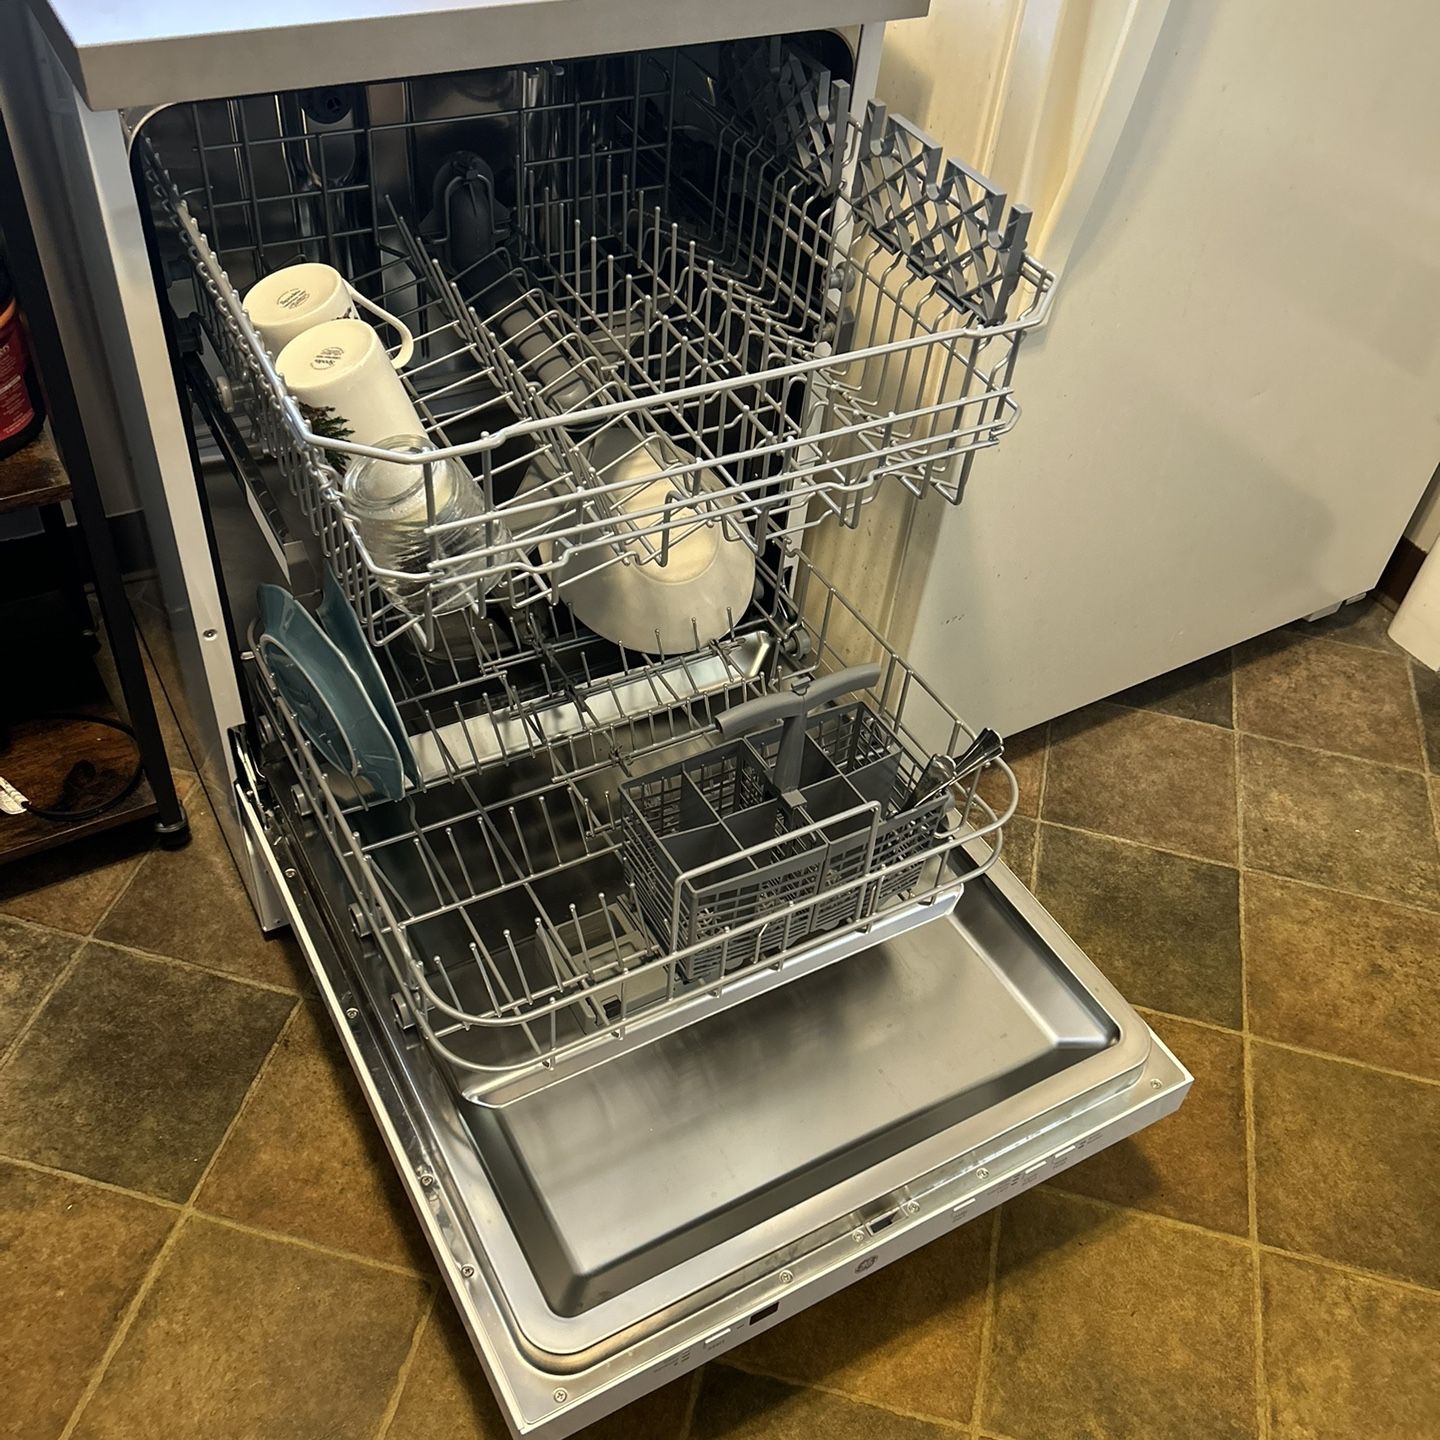 Brand new GE Portable dishwasher For Sale!